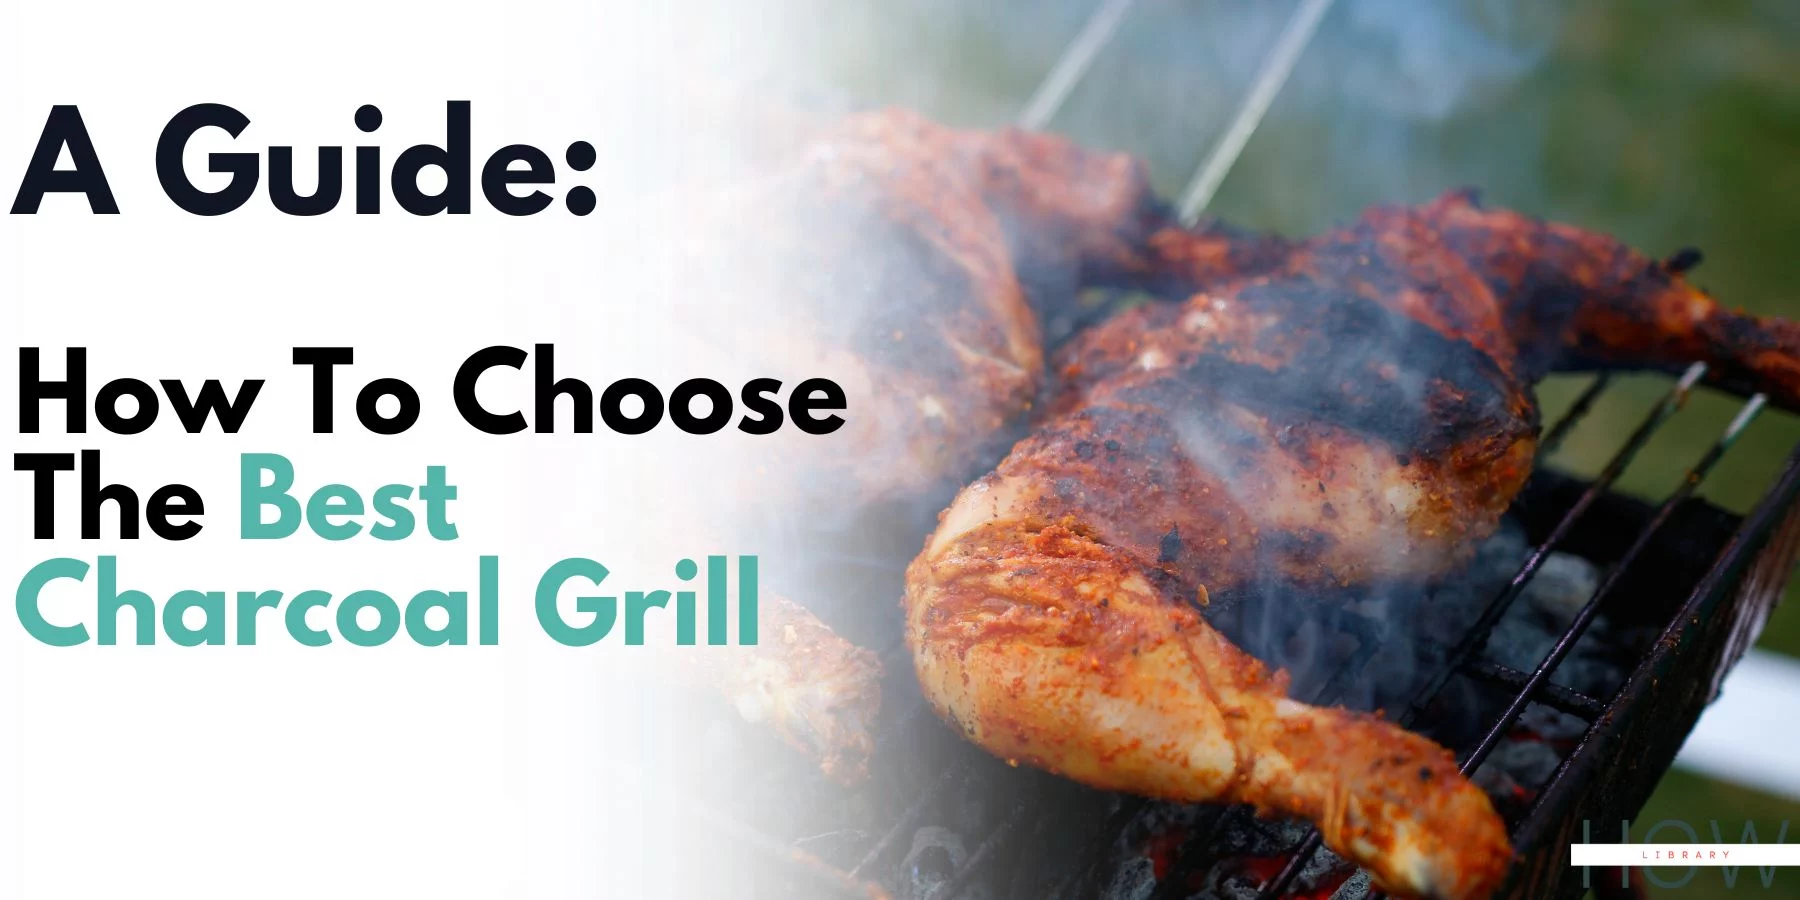 How To Choose The Best Charcoal Grill